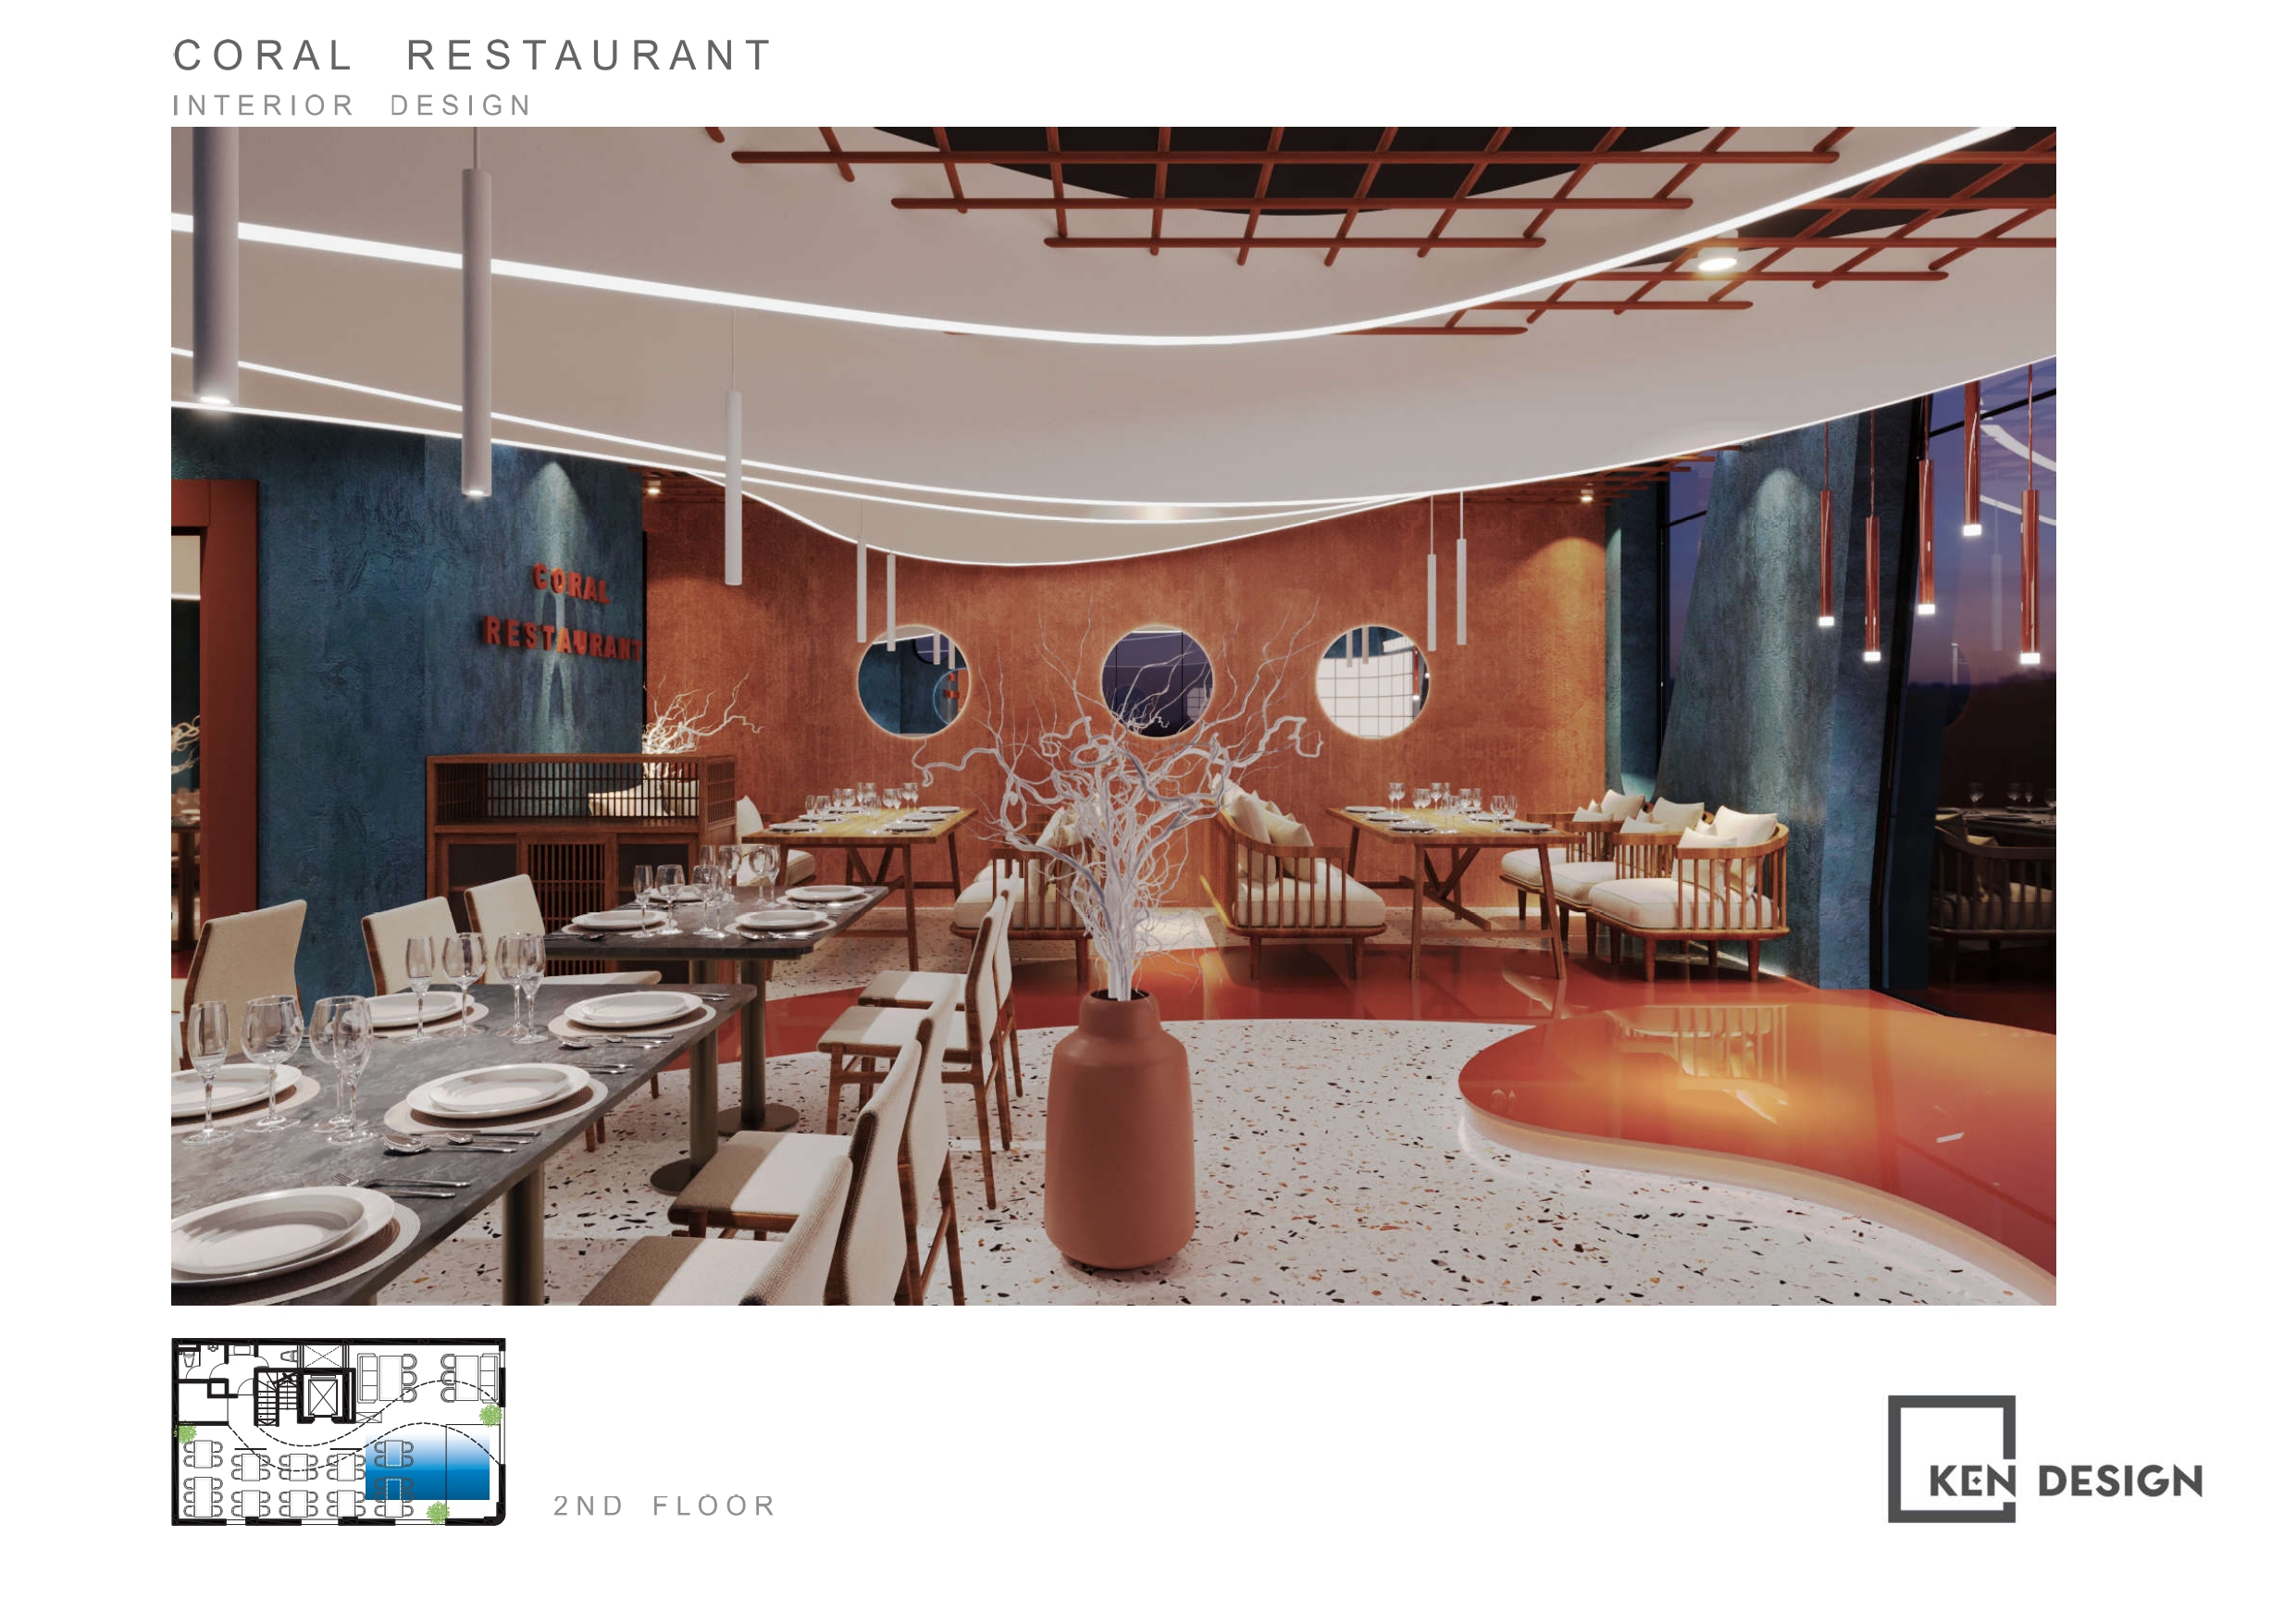 The design of Coral Seafood Restaurant